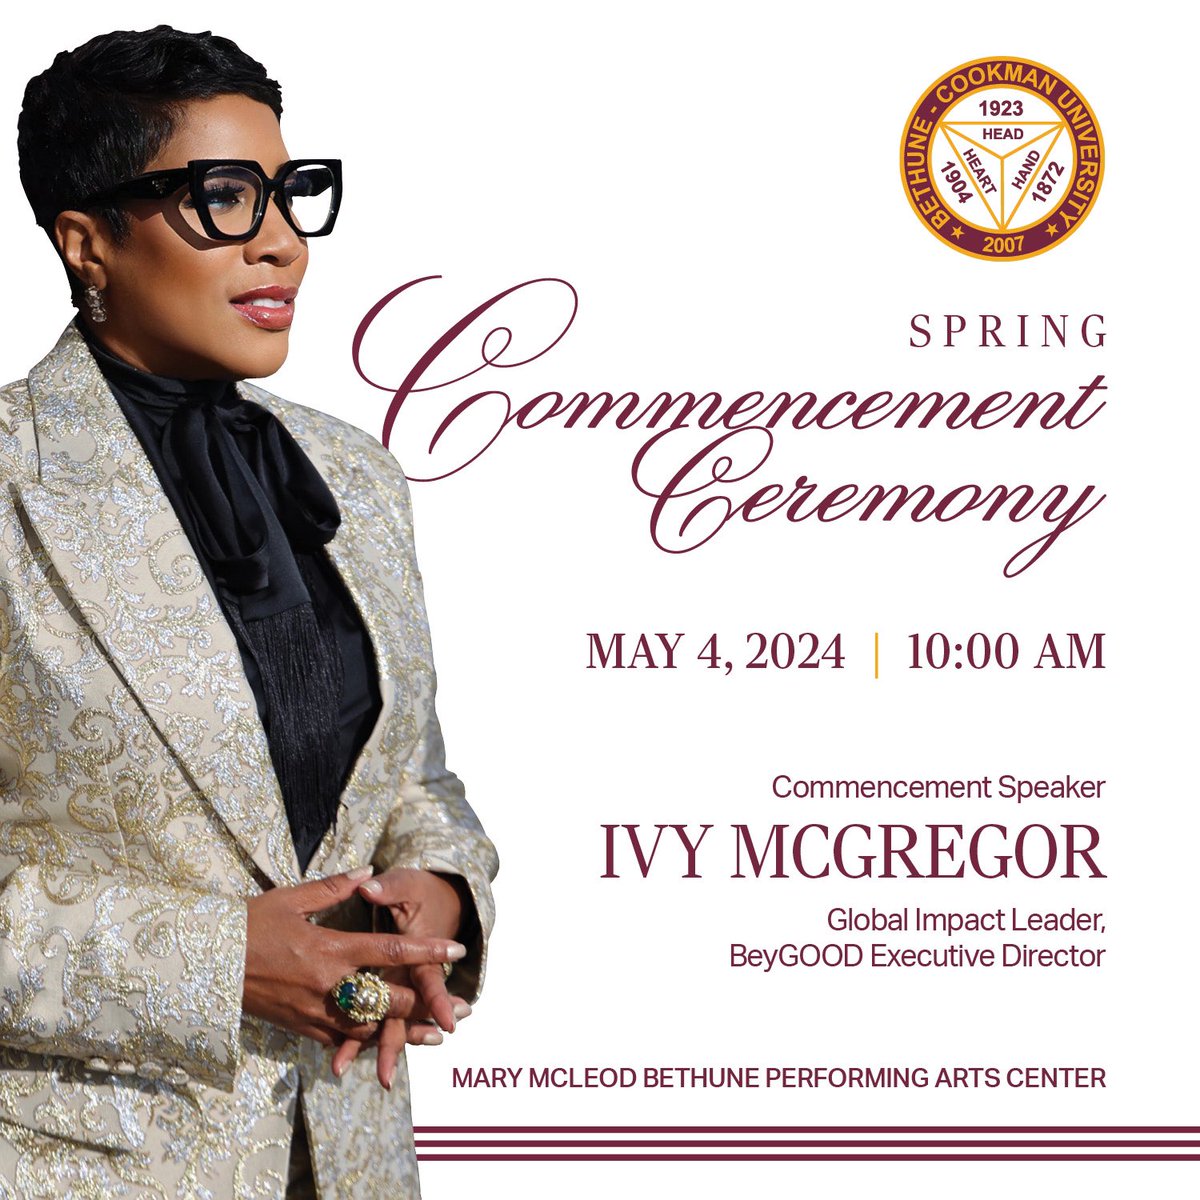 Today marks the much-awaited beginning of the three-event, multi-day celebration of commencement activities at Bethune-Cookman University! The processional for Consecration begins today at 6:00 PM. The program is to follow 6:30 PM. 

For more: bit.ly/3Wo505o